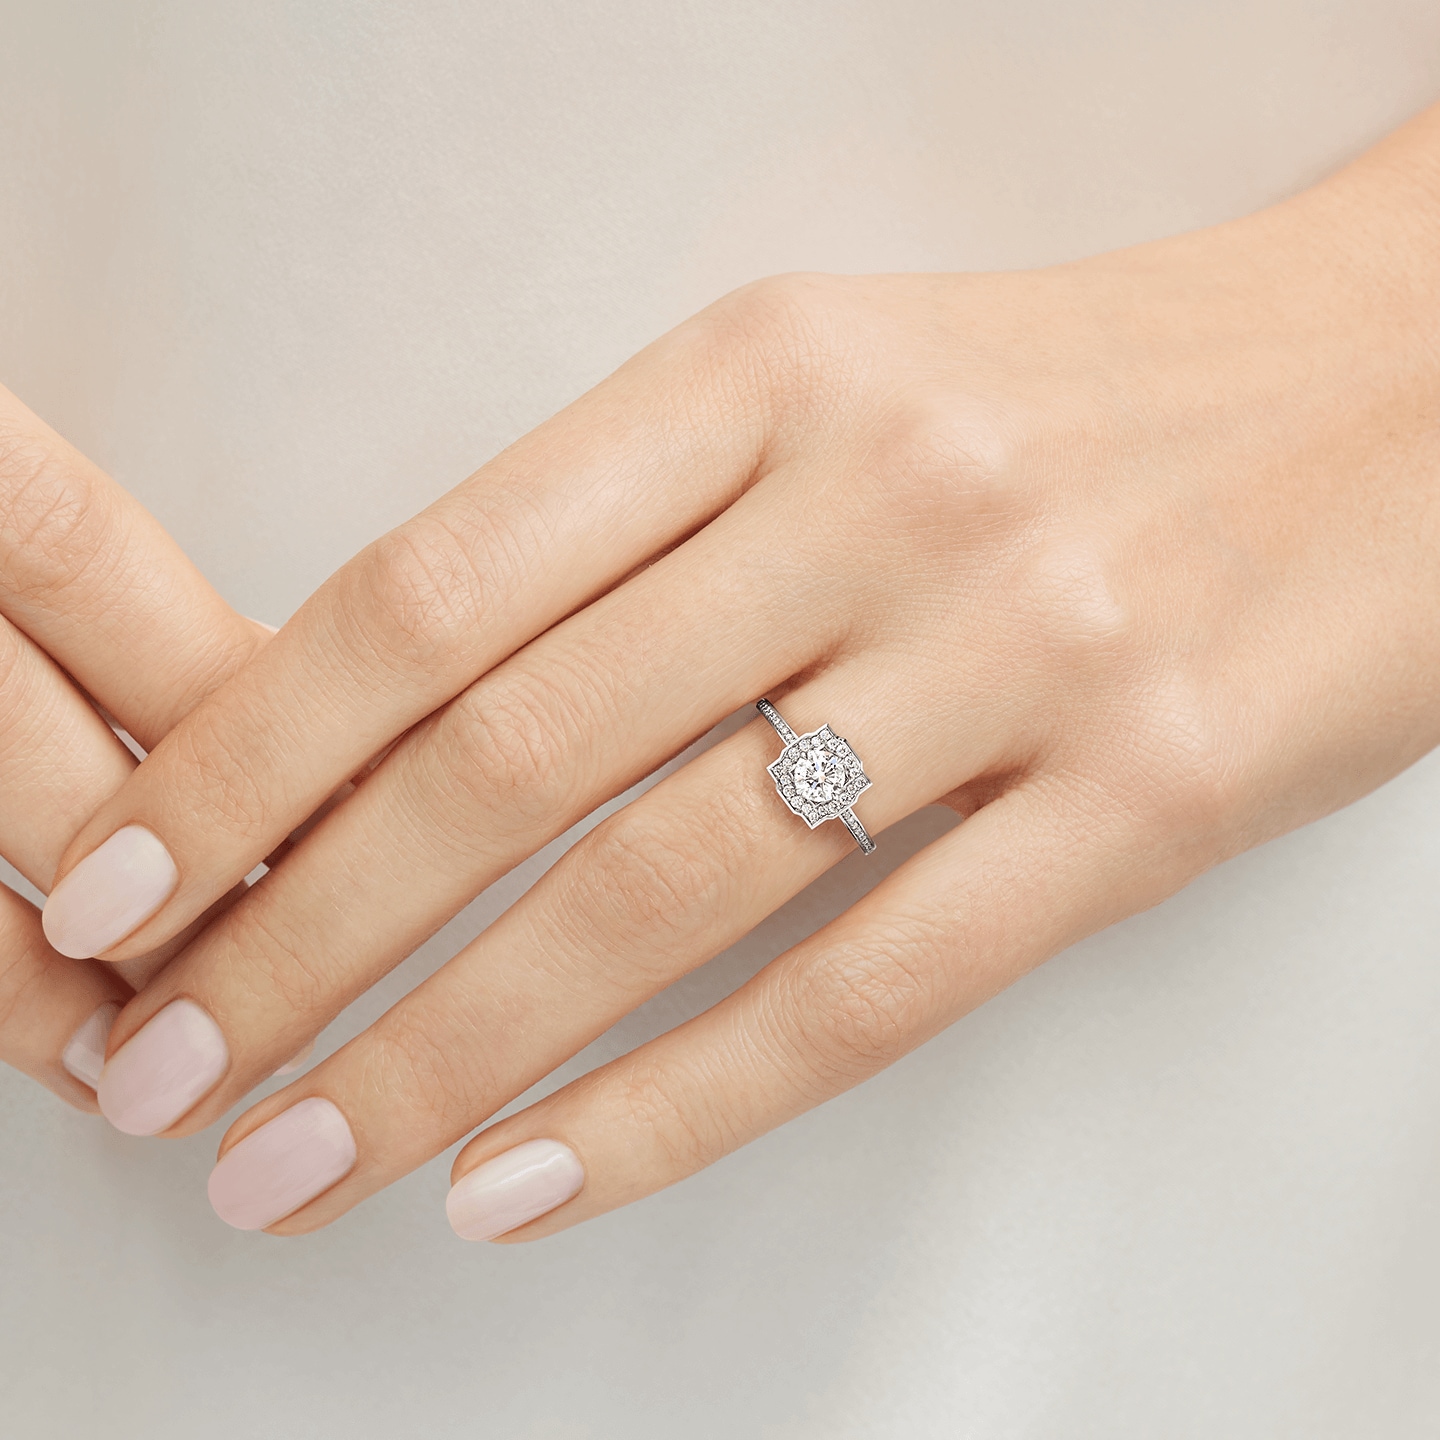 Belle Round Brilliant Diamond Micropavé Engagement Ring featured on a model